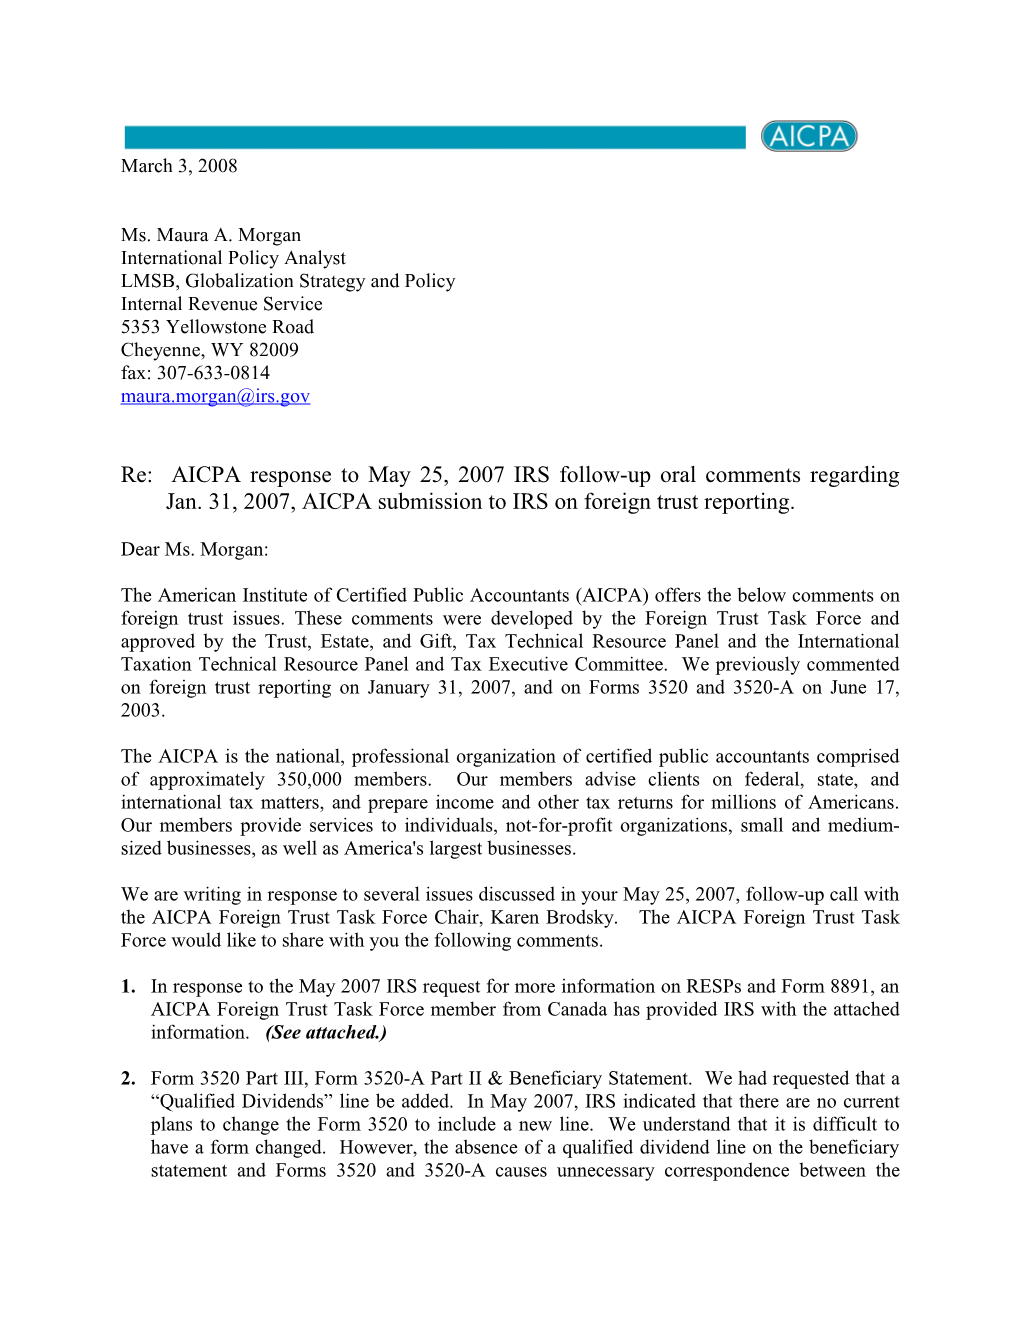 AICPA Comments to IRS on Foreign Trust Issues Follow-Up - March 3, 2008